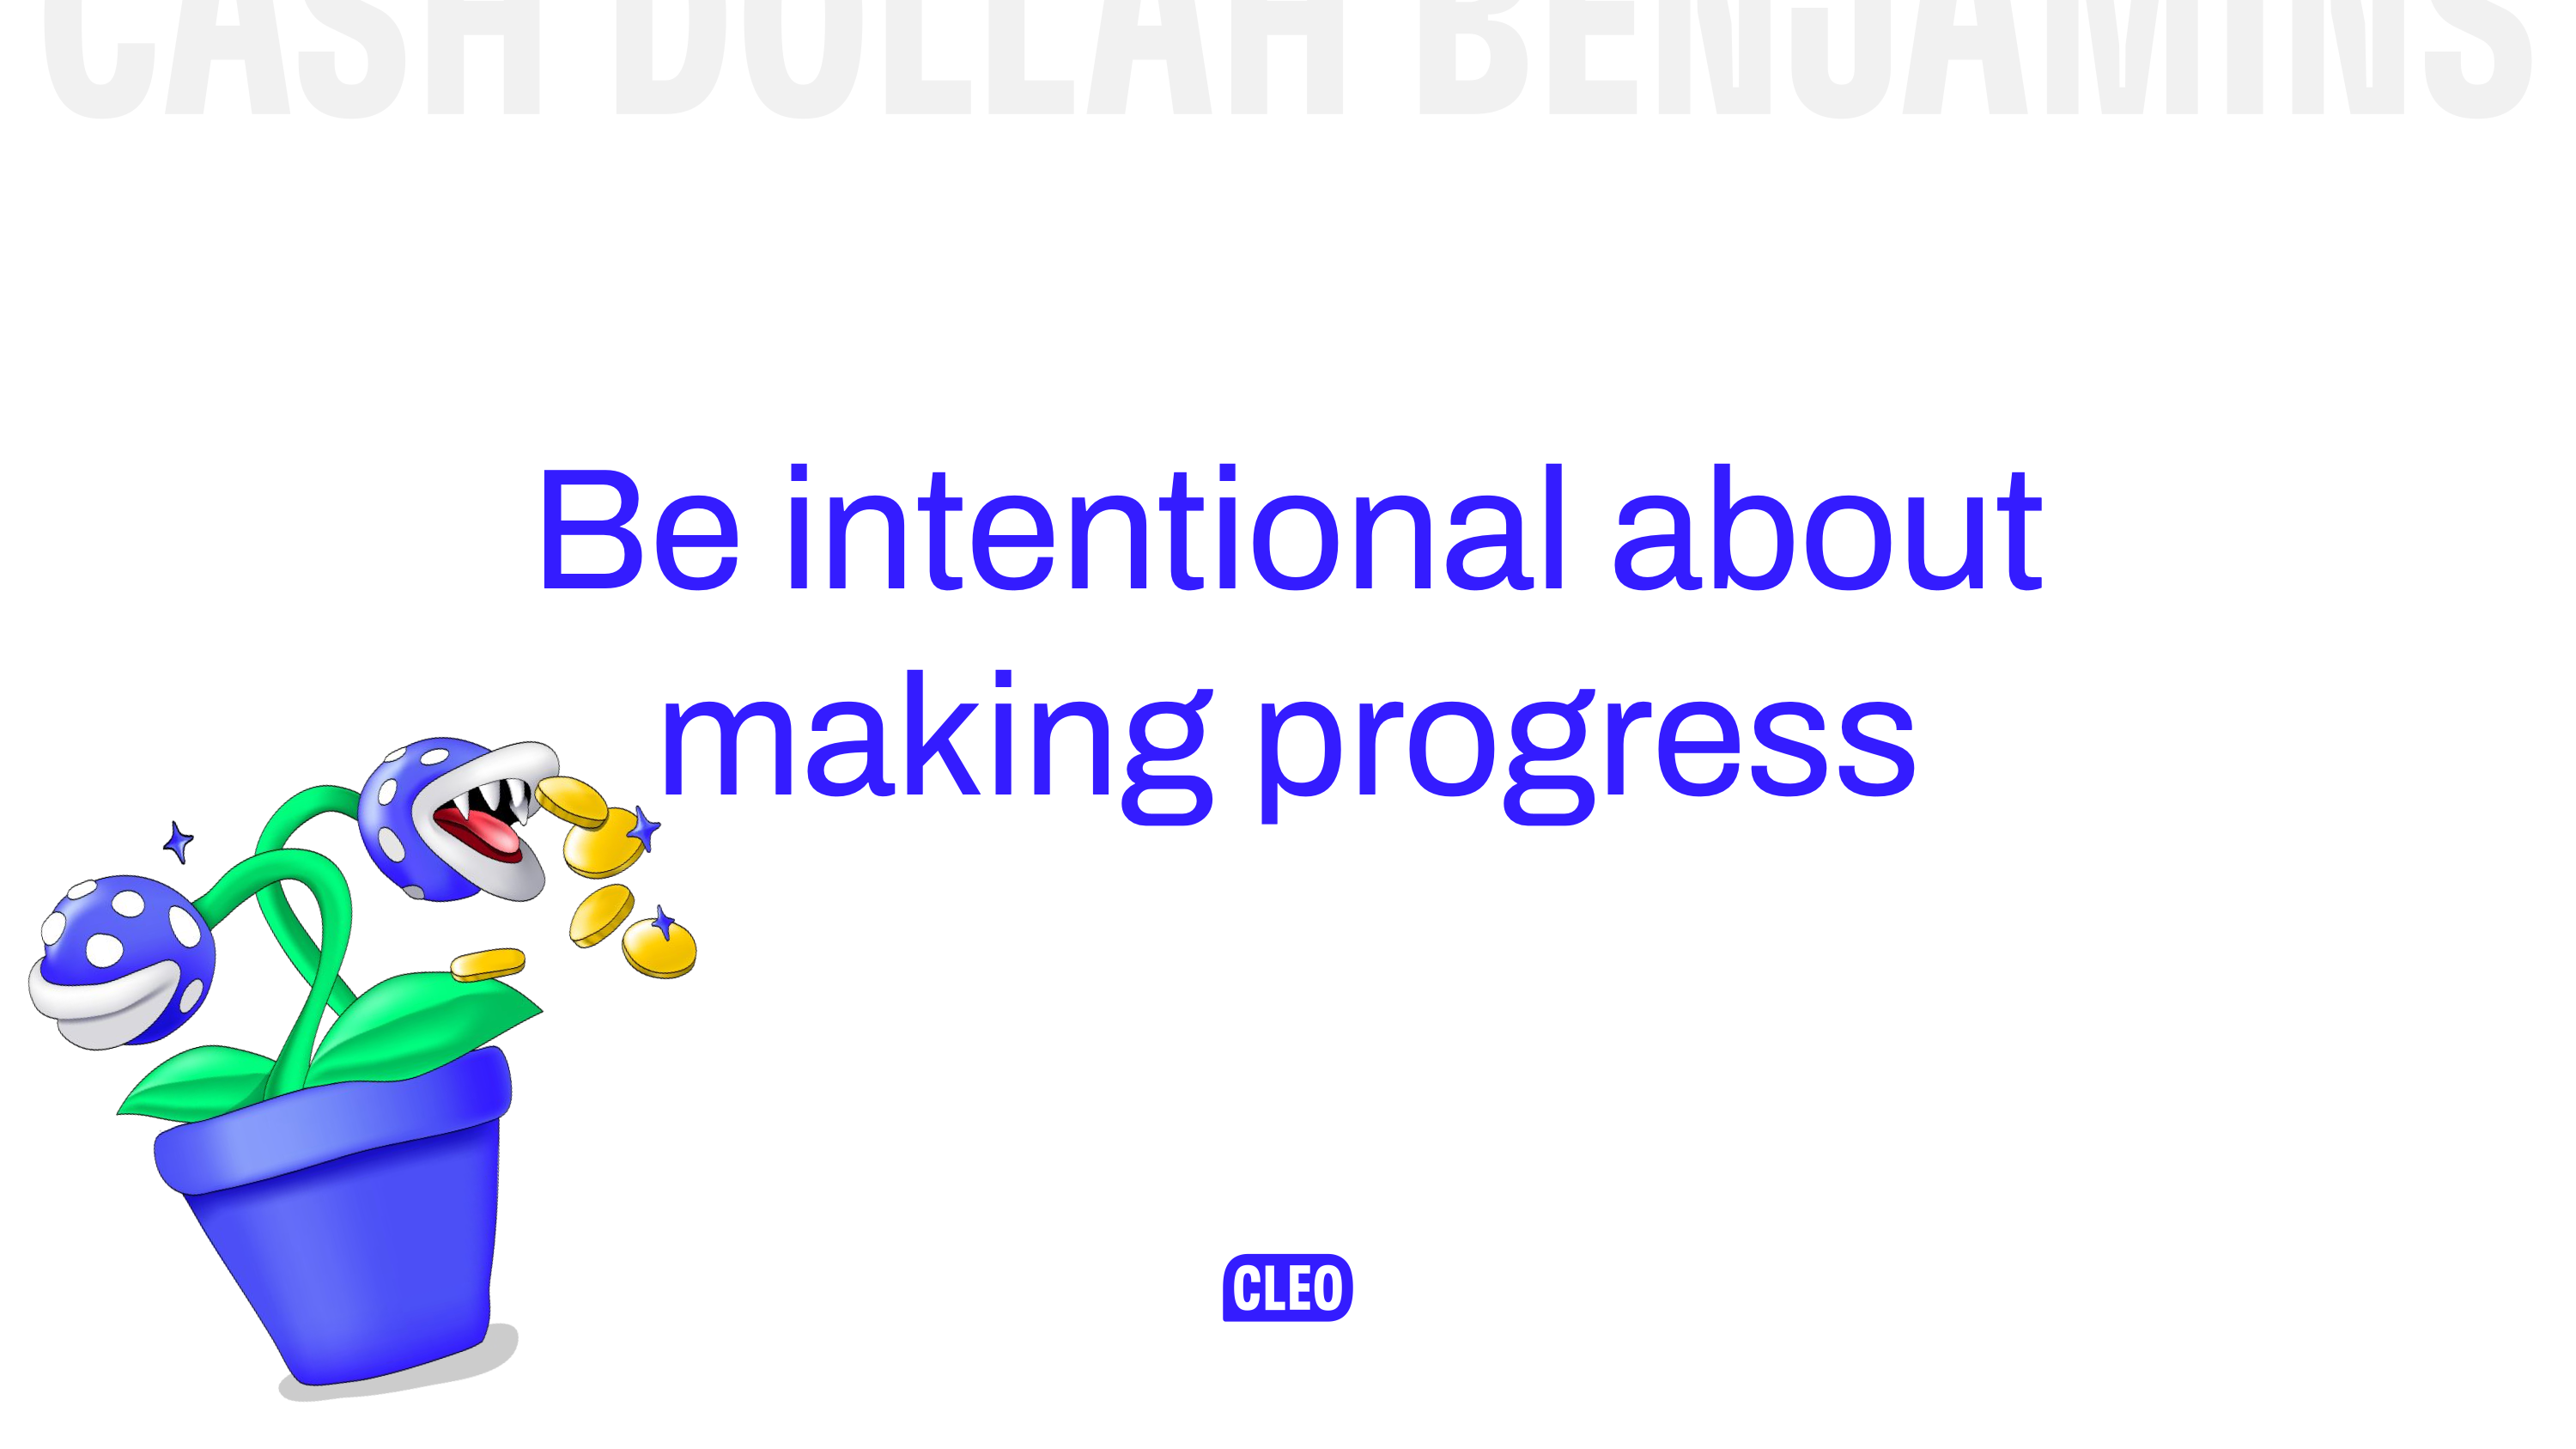 Be intentional about making progress - there is a blue venus flytrap spitting sparkly coins to illustrate this for some reason; text: Be intentional about making progress